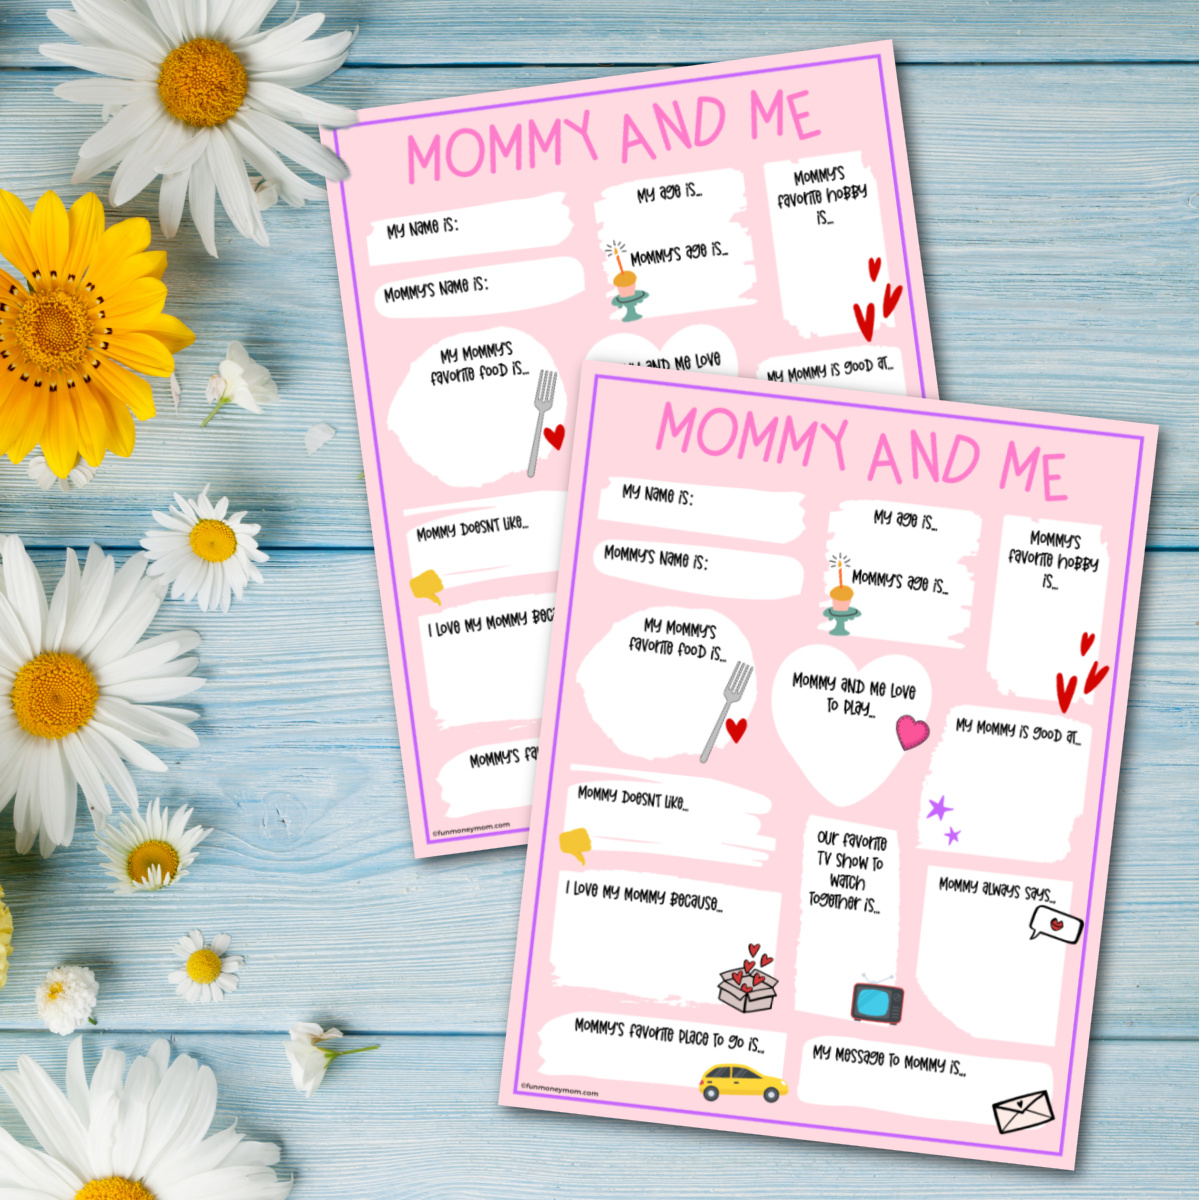 Mother's day activity sheets with "mommy and me" theme on a blue wooden background, accompanied by a yellow flower.